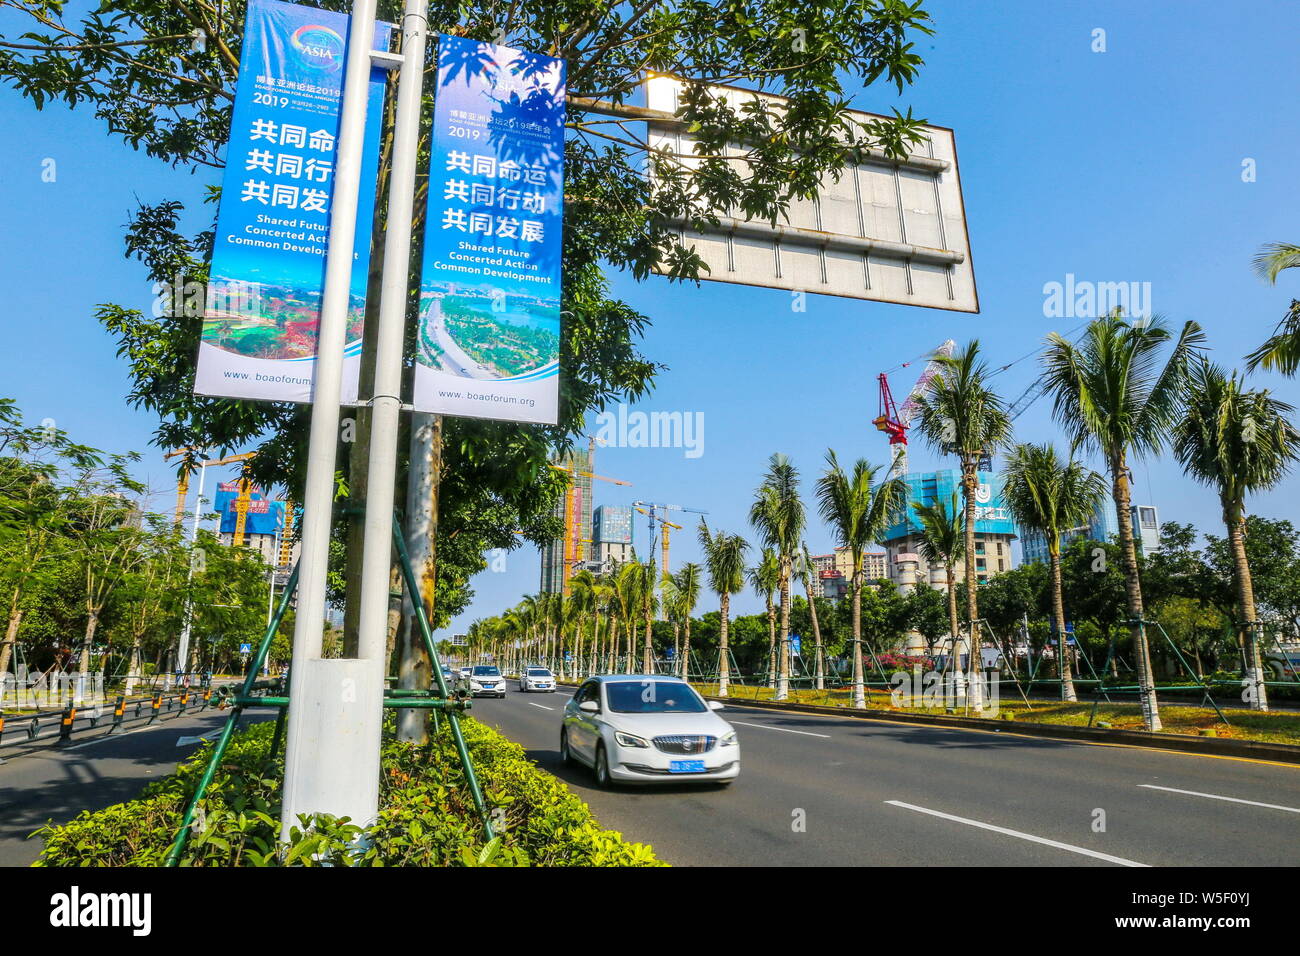 Cars drive past banners for the Boao Forum for Asia Annual Conference 2019 on lampposts in Haikou city, south China's Hainan province, 20 March 2019. Stock Photo